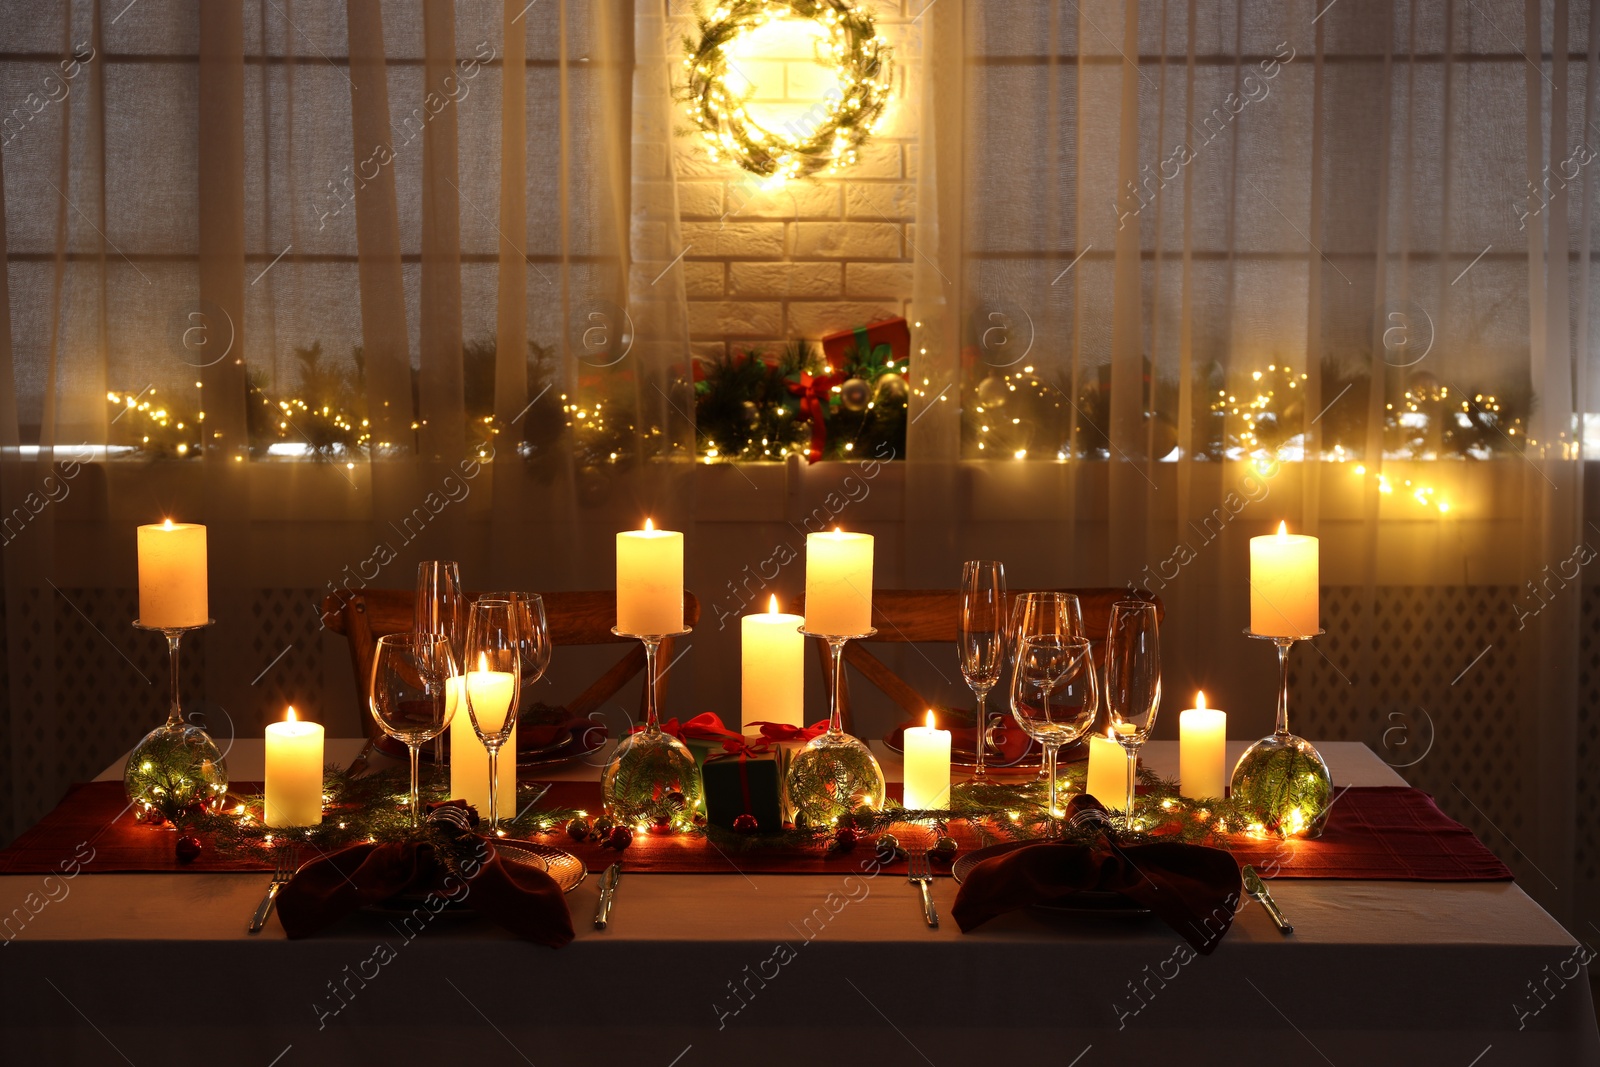 Photo of Christmas table setting with burning candles and festive decor